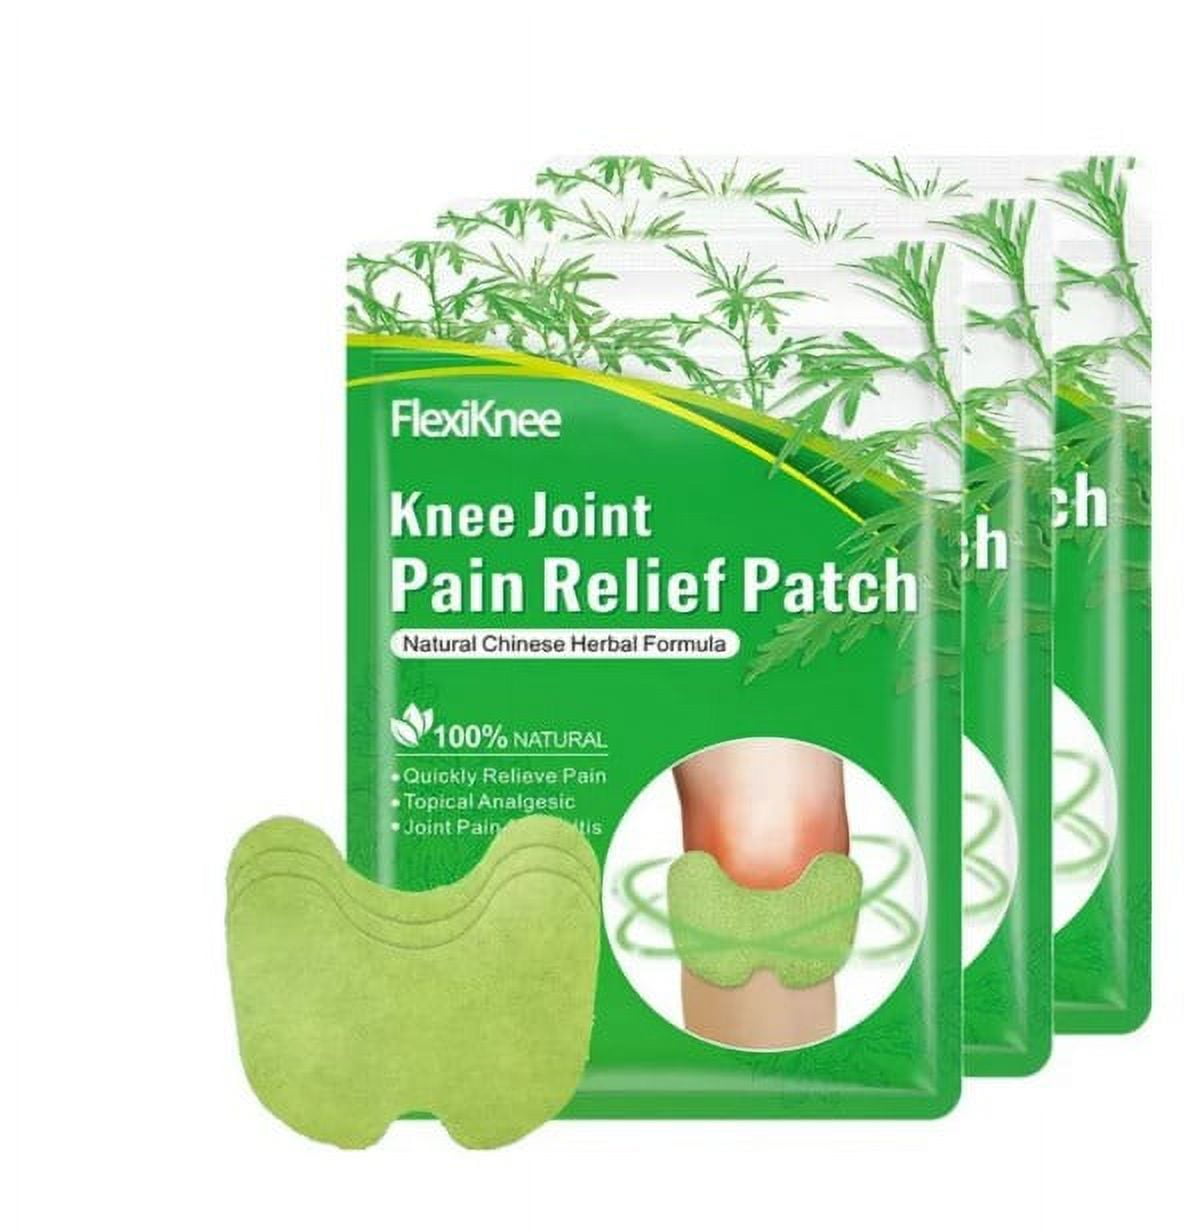 Flexiknee-Natural-Knee-Pain-Patch-Flexiknee-Knee-Joint-Pain-Relief-Patchs-Herbal-Knee-Patches-for-Pain-Relief-36Pcs